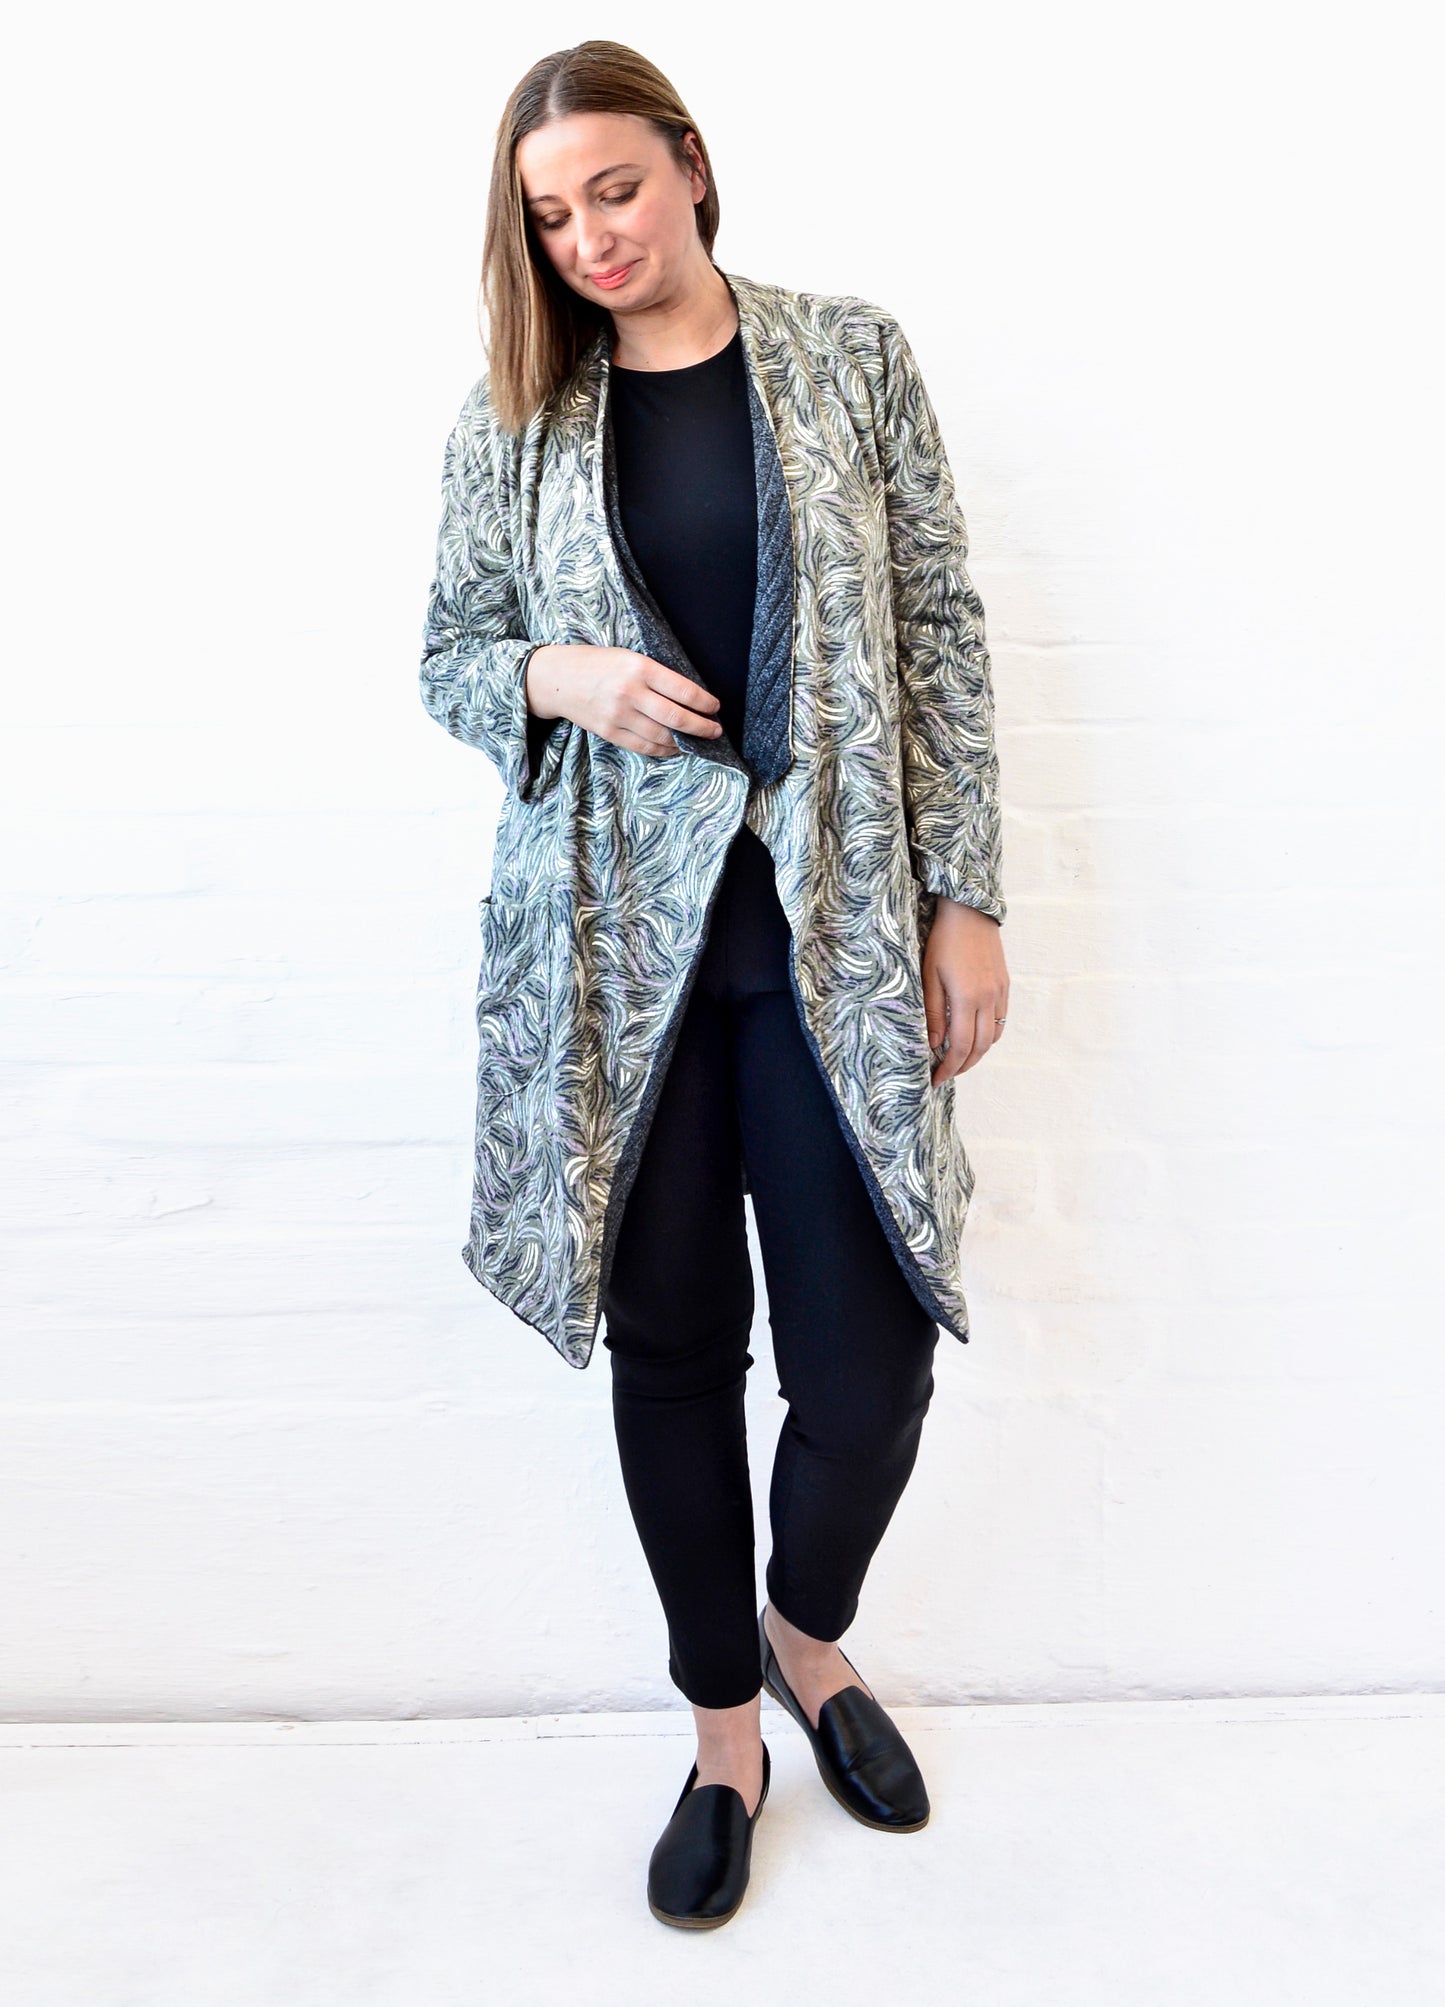 Stefana Reversible Cardigans in olive Huckleberry print and charcoal rib